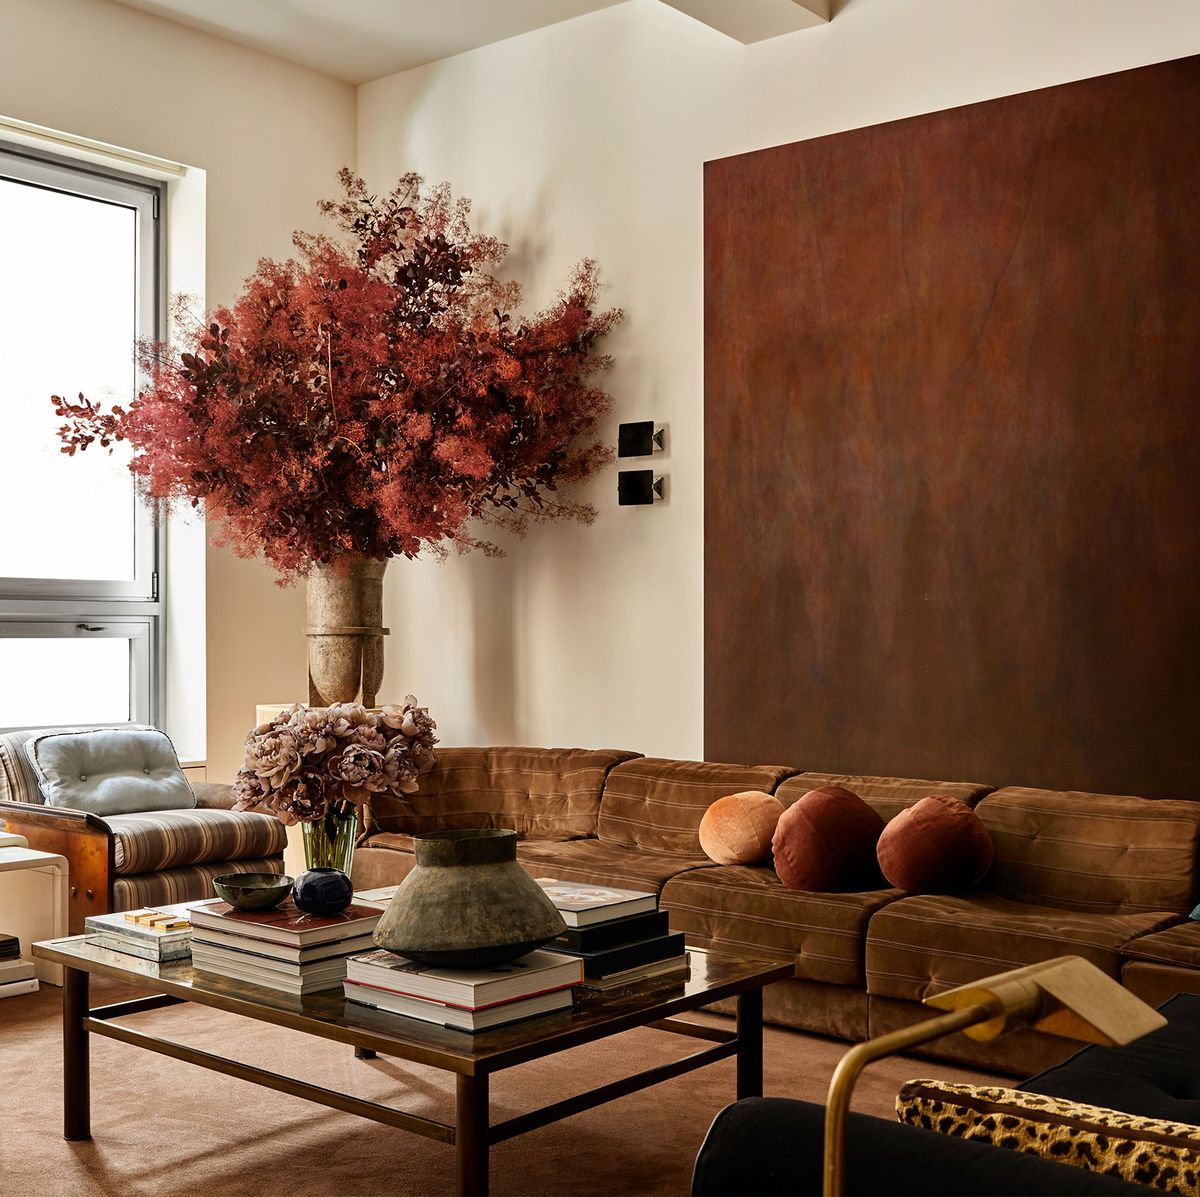 15 Complementary Colors That Go with Brown